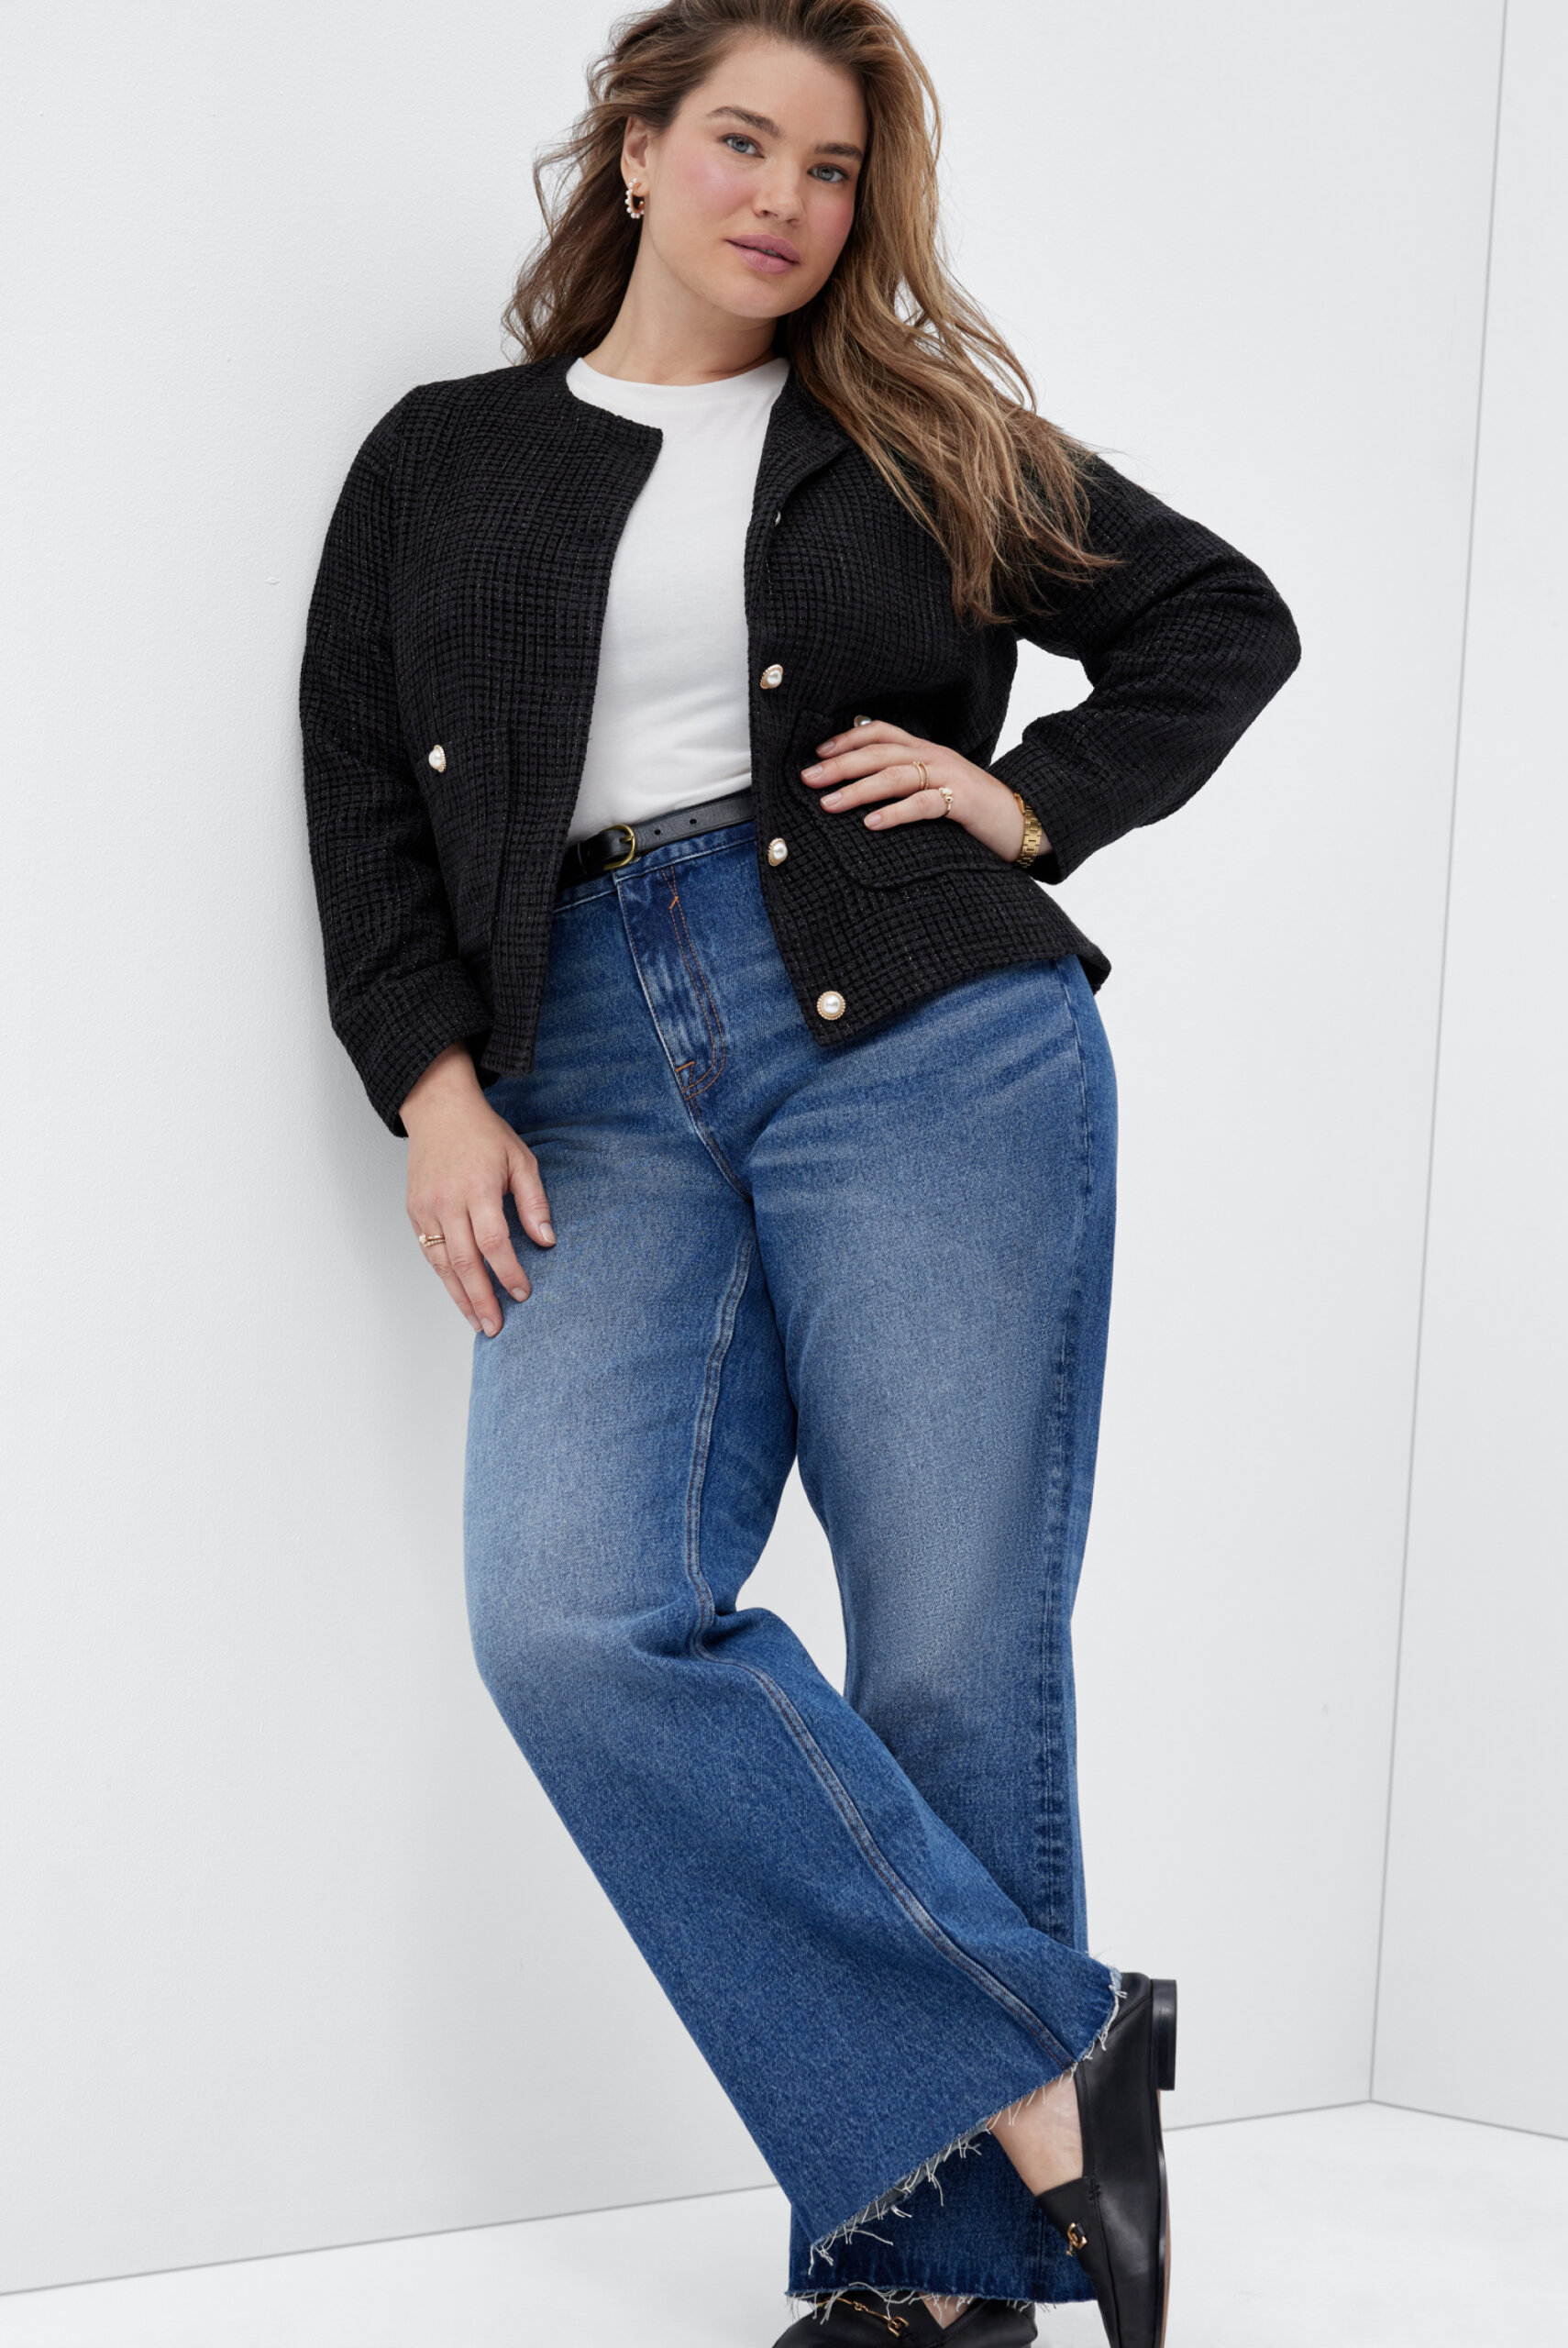 A plus-size woman wears an open black blazer over a white t-shirt and blue flare jeans.